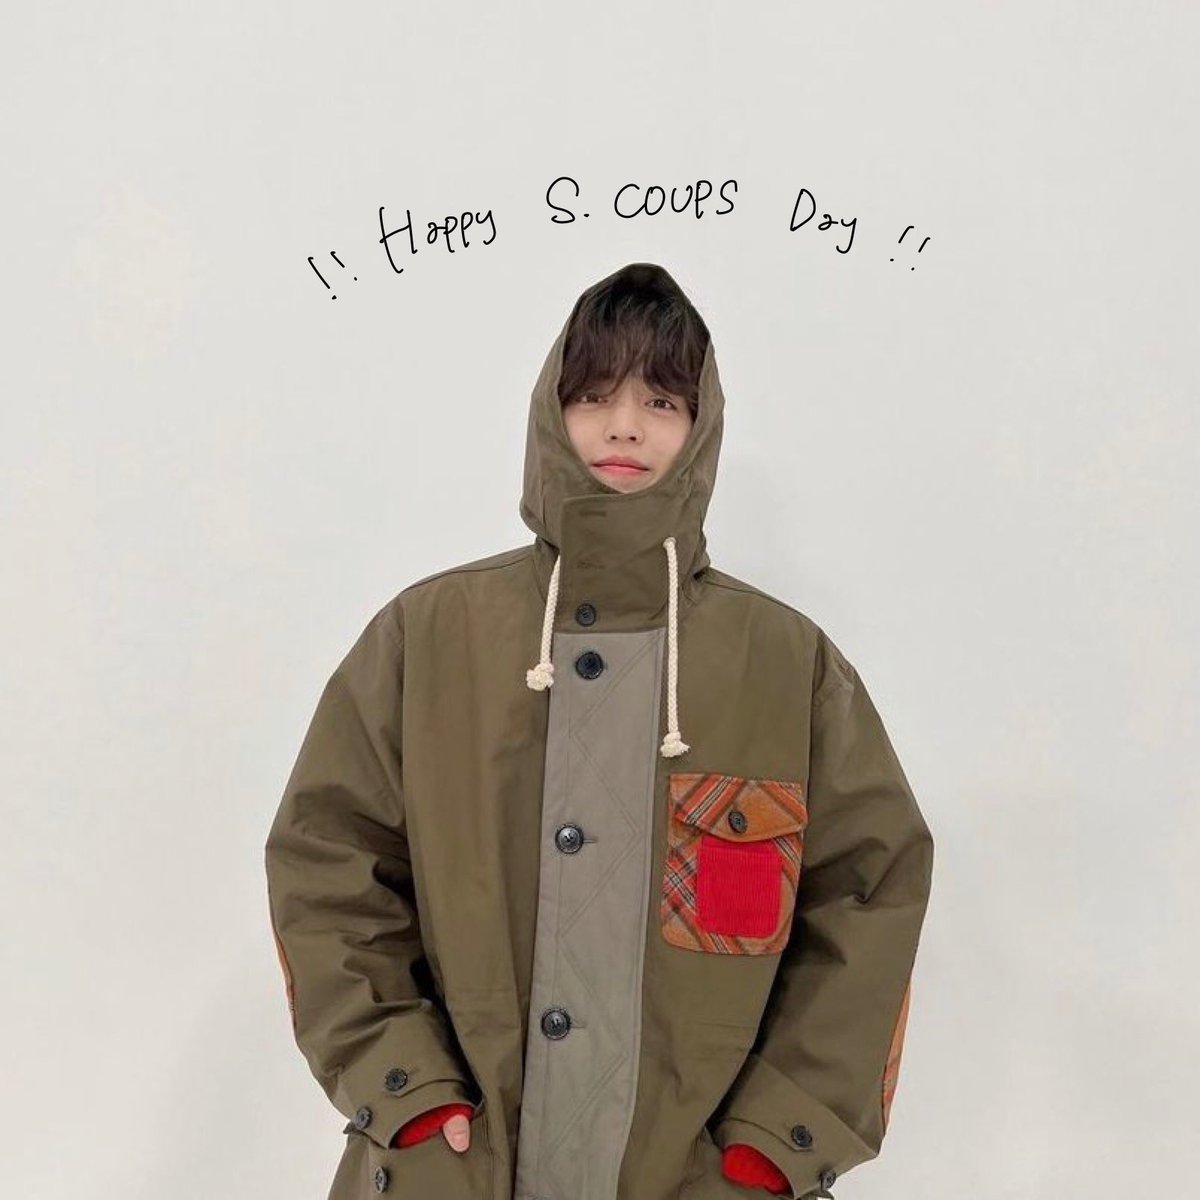 #CheersForScoupsDay Photo,#CheersForScoupsDay Photo by ぺぺ,ぺぺ on twitter tweets #CheersForScoupsDay Photo